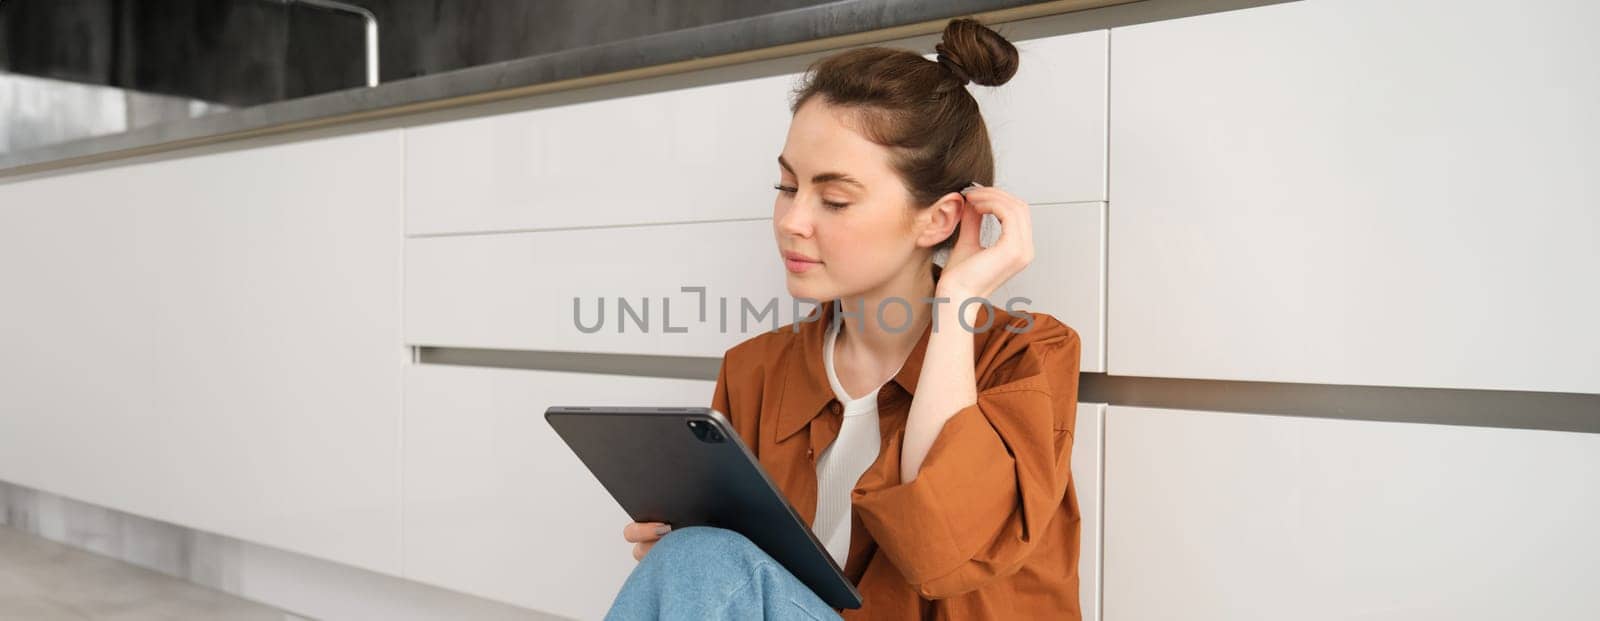 Portrait of cute young woman, freelancer working from home, sitting on kitchen floor with digital tablet and smiling.